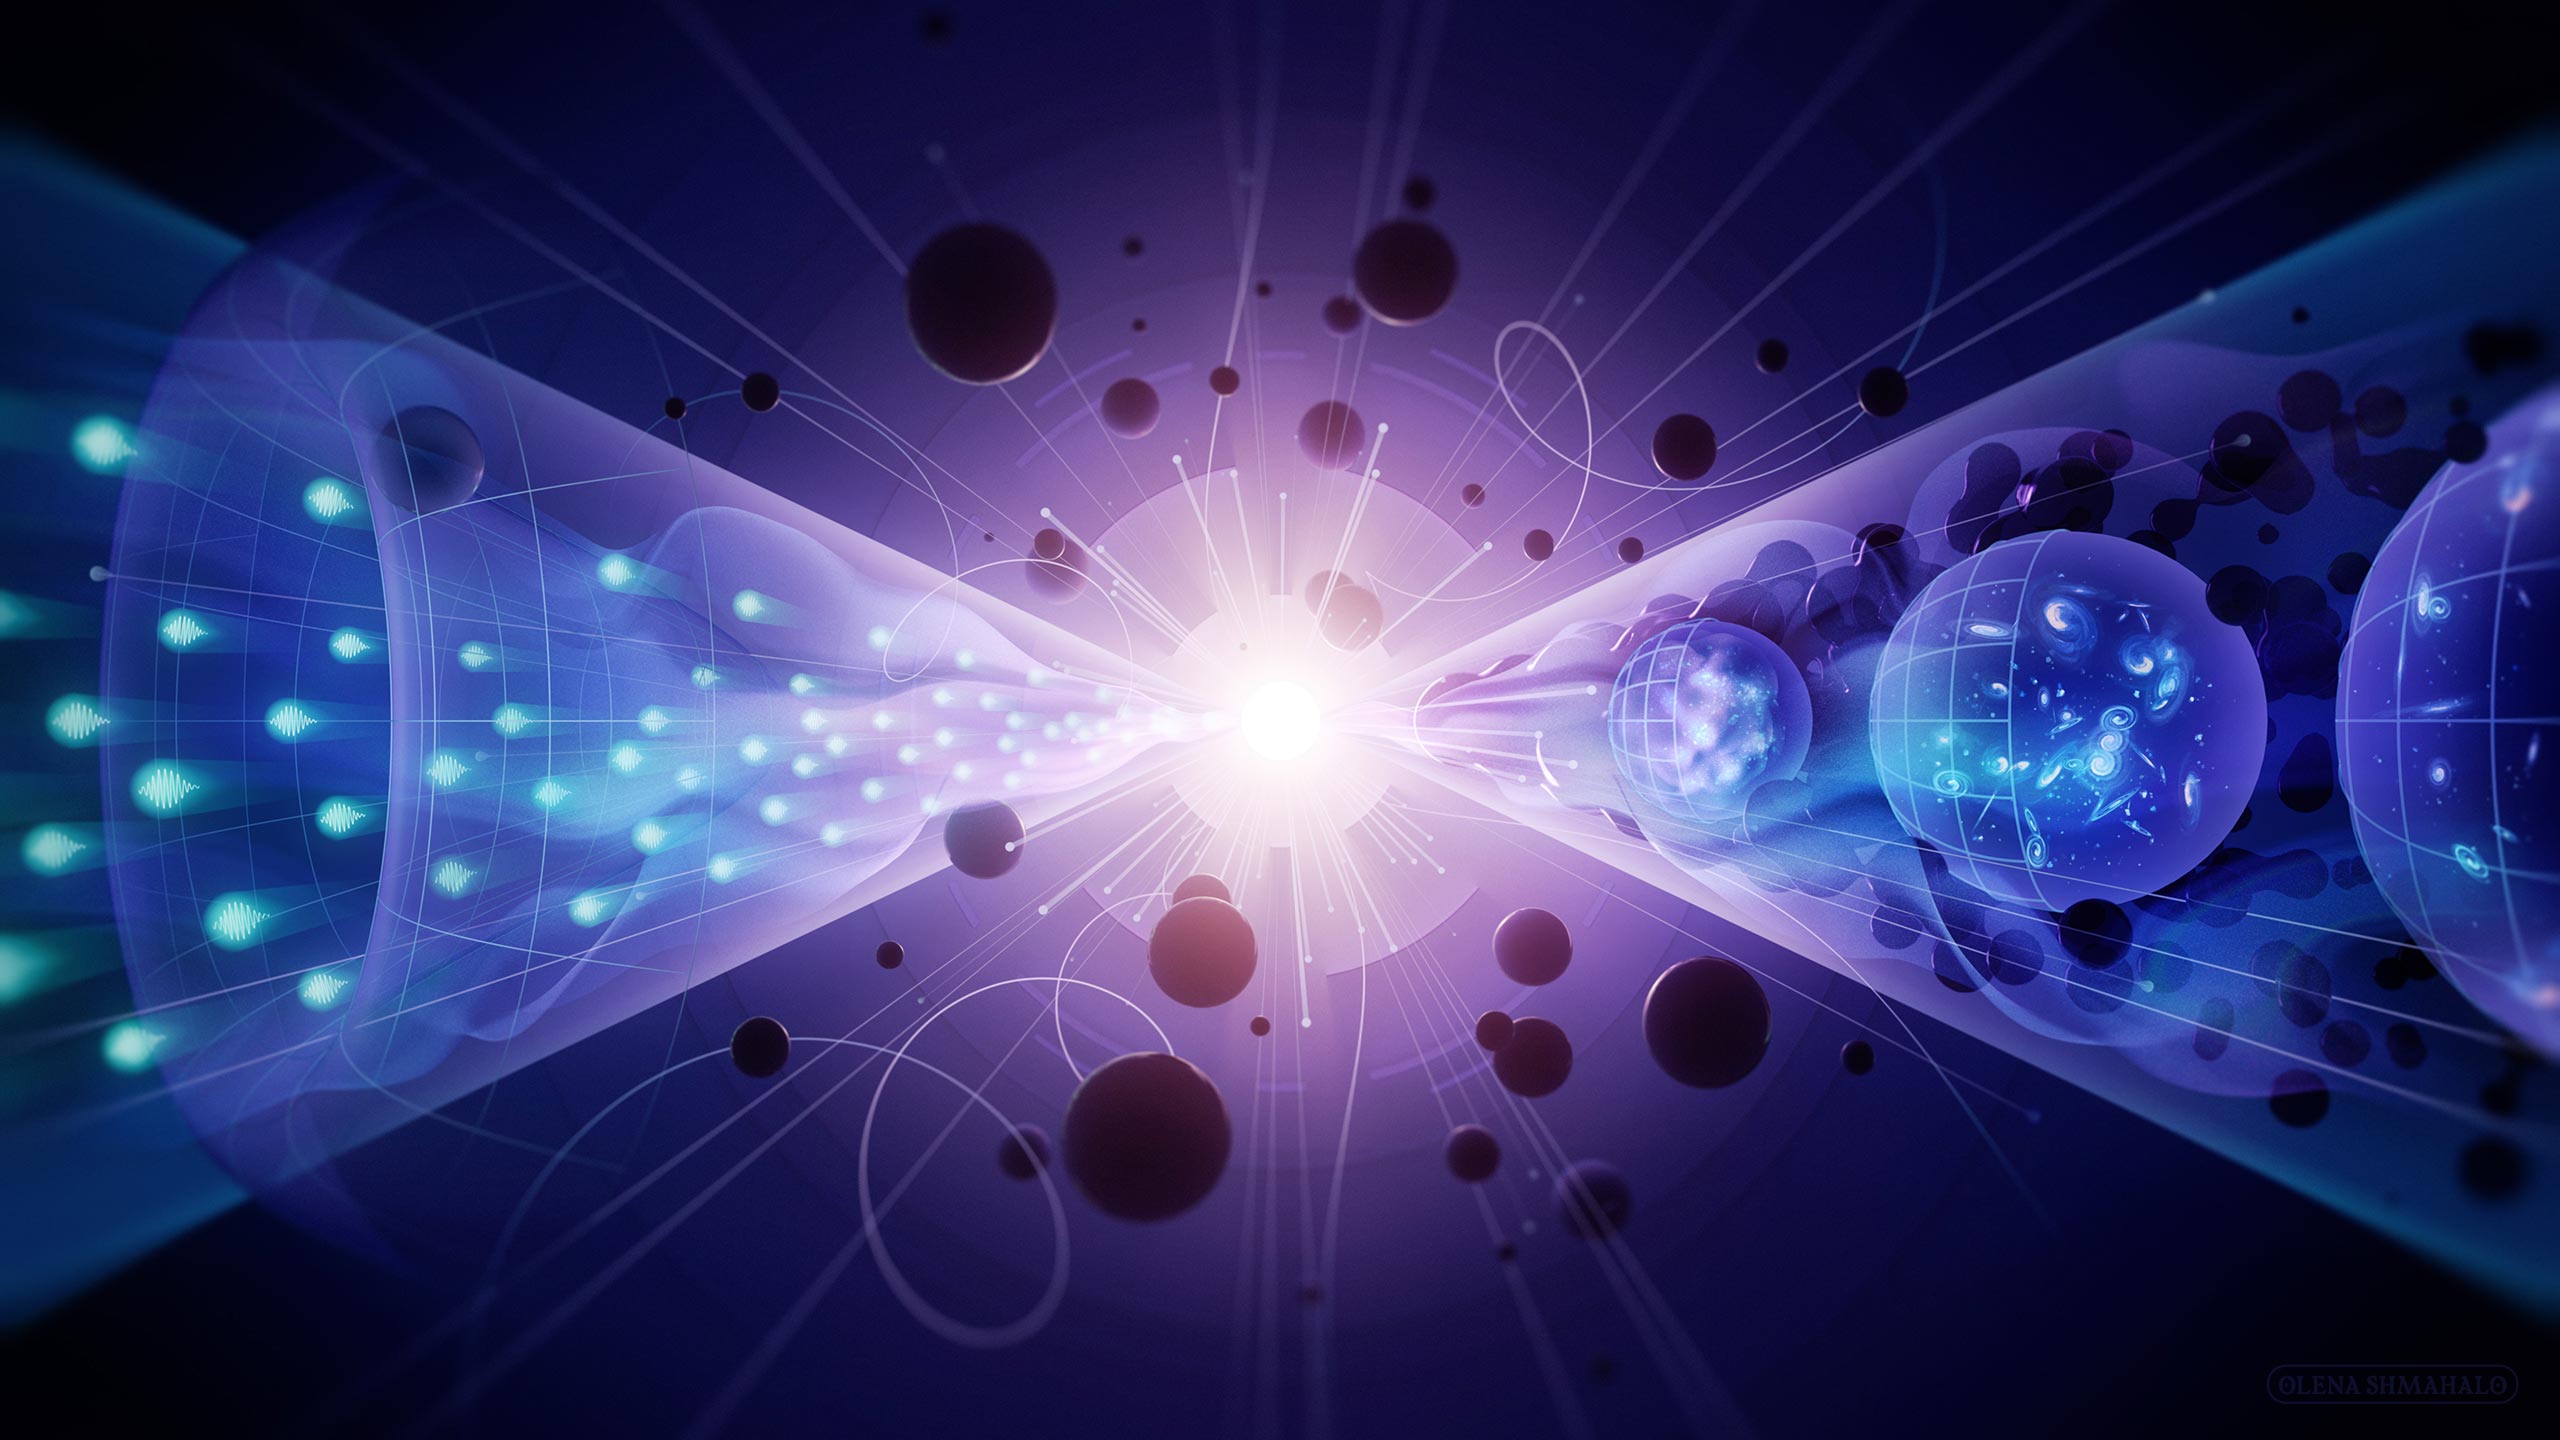 A semi-abstract 3D illustration depicting subatomic and astronomical physics. Particle tracks burst out of a bright center, suggestive of a high-energy event / the Big Bang. Two light cones emerge from this explosion towards the left and right, along with elements corresponding to quantum physics and astrophysics respectively. Left: oscillating neutrinos, Higgs potential. Right: the evolution of the universe in three stages – 1. primordial cosmic soup / CMB, 2. current distribution of stars and galaxies, 3. further expansion. Dark blobs clustering around the spheres suggest dark matter / primordial black holes. Art by Olena Shmahalo for U.S. Particle Physics.